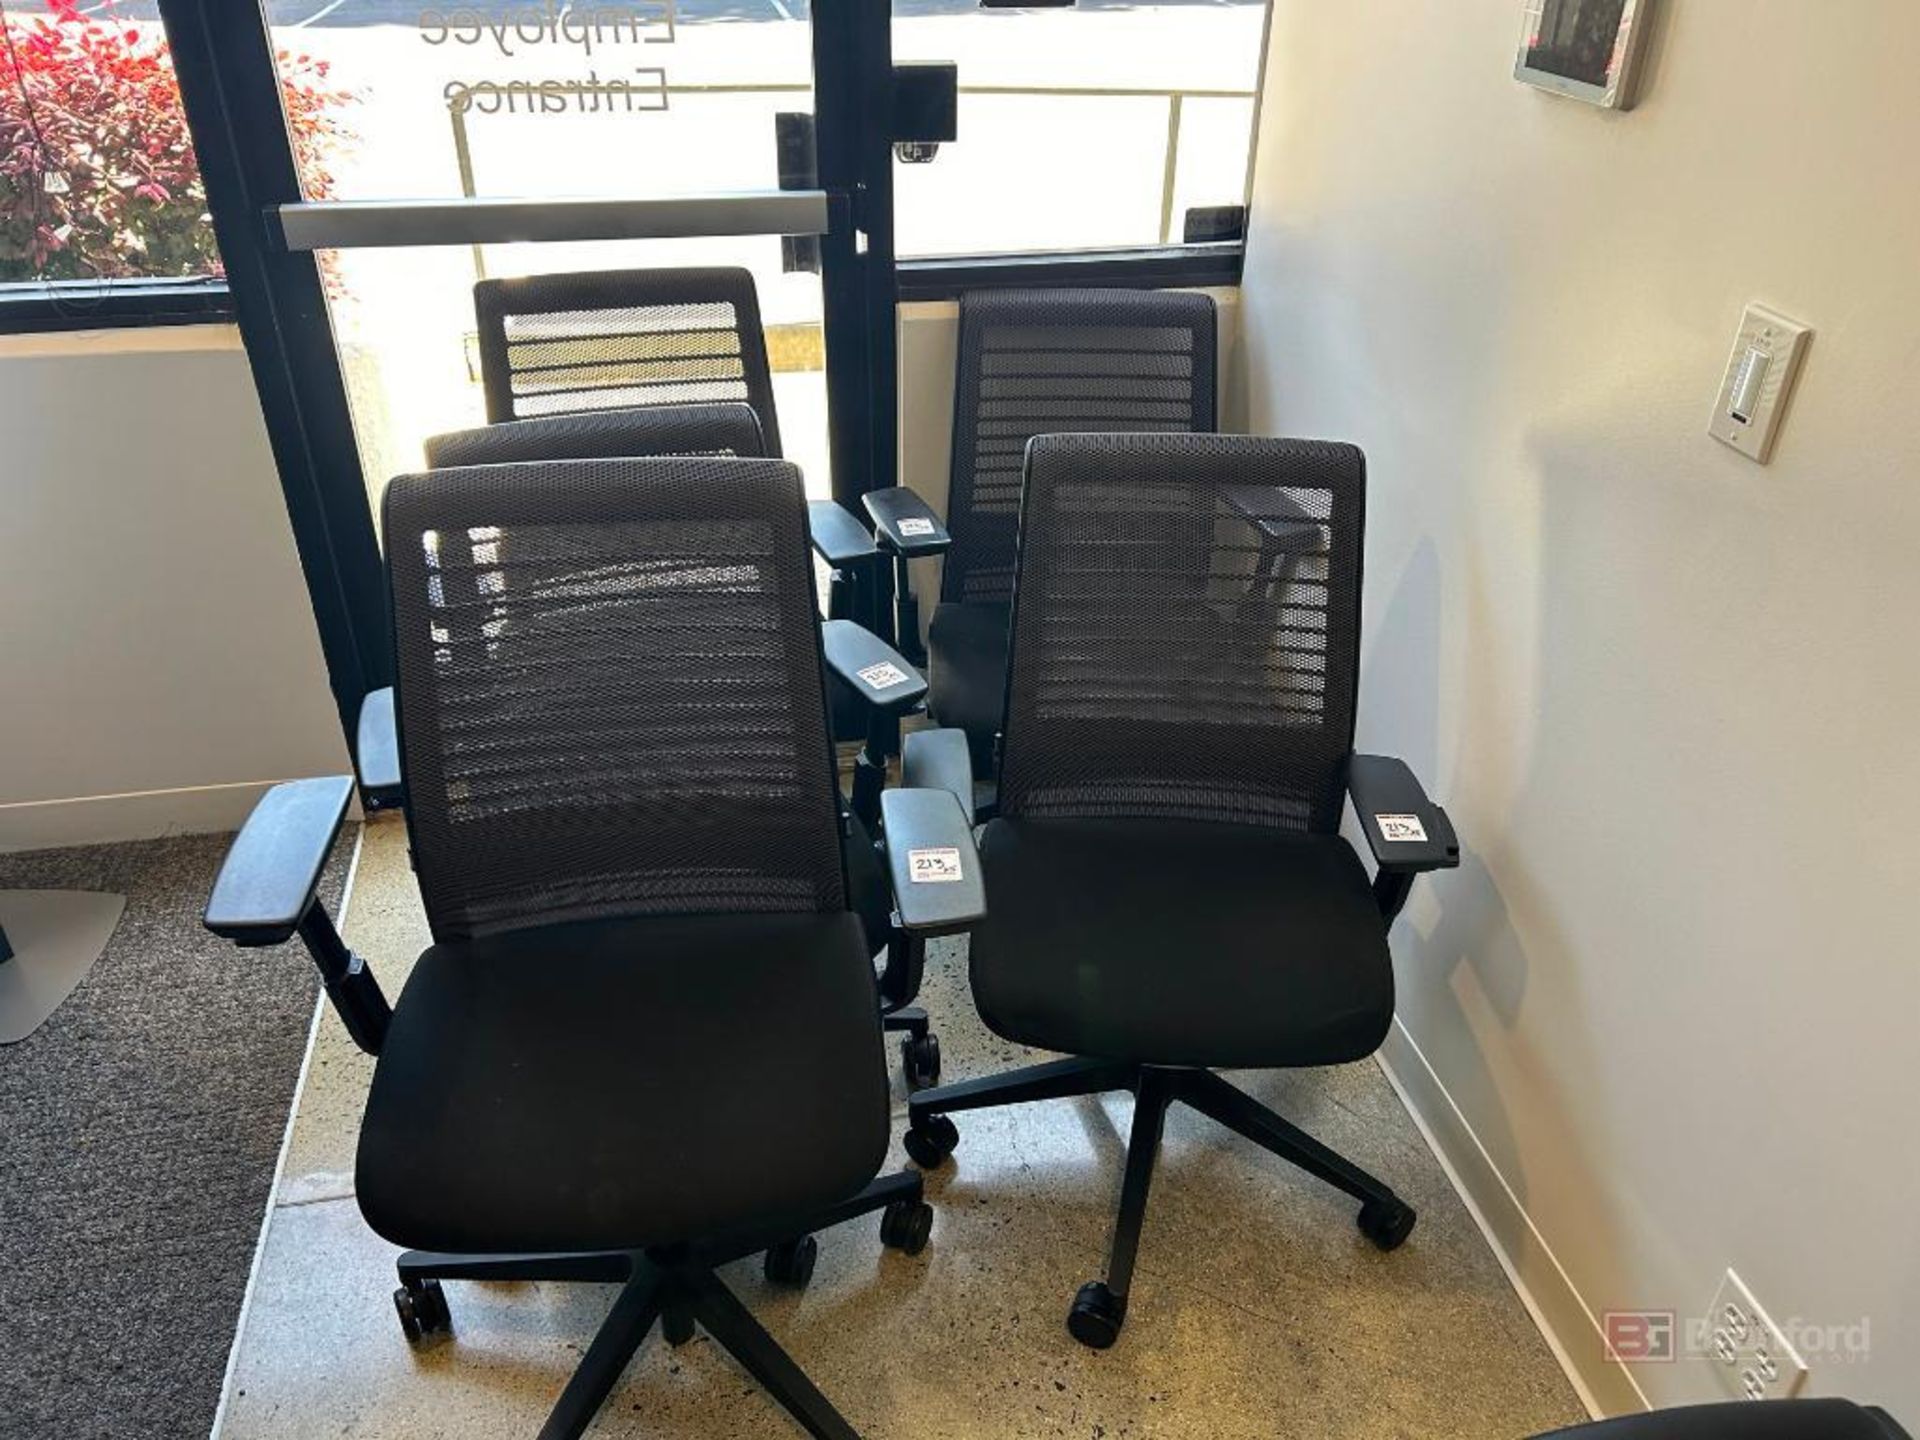 (5) Steelcase Think Adjustable Chairs